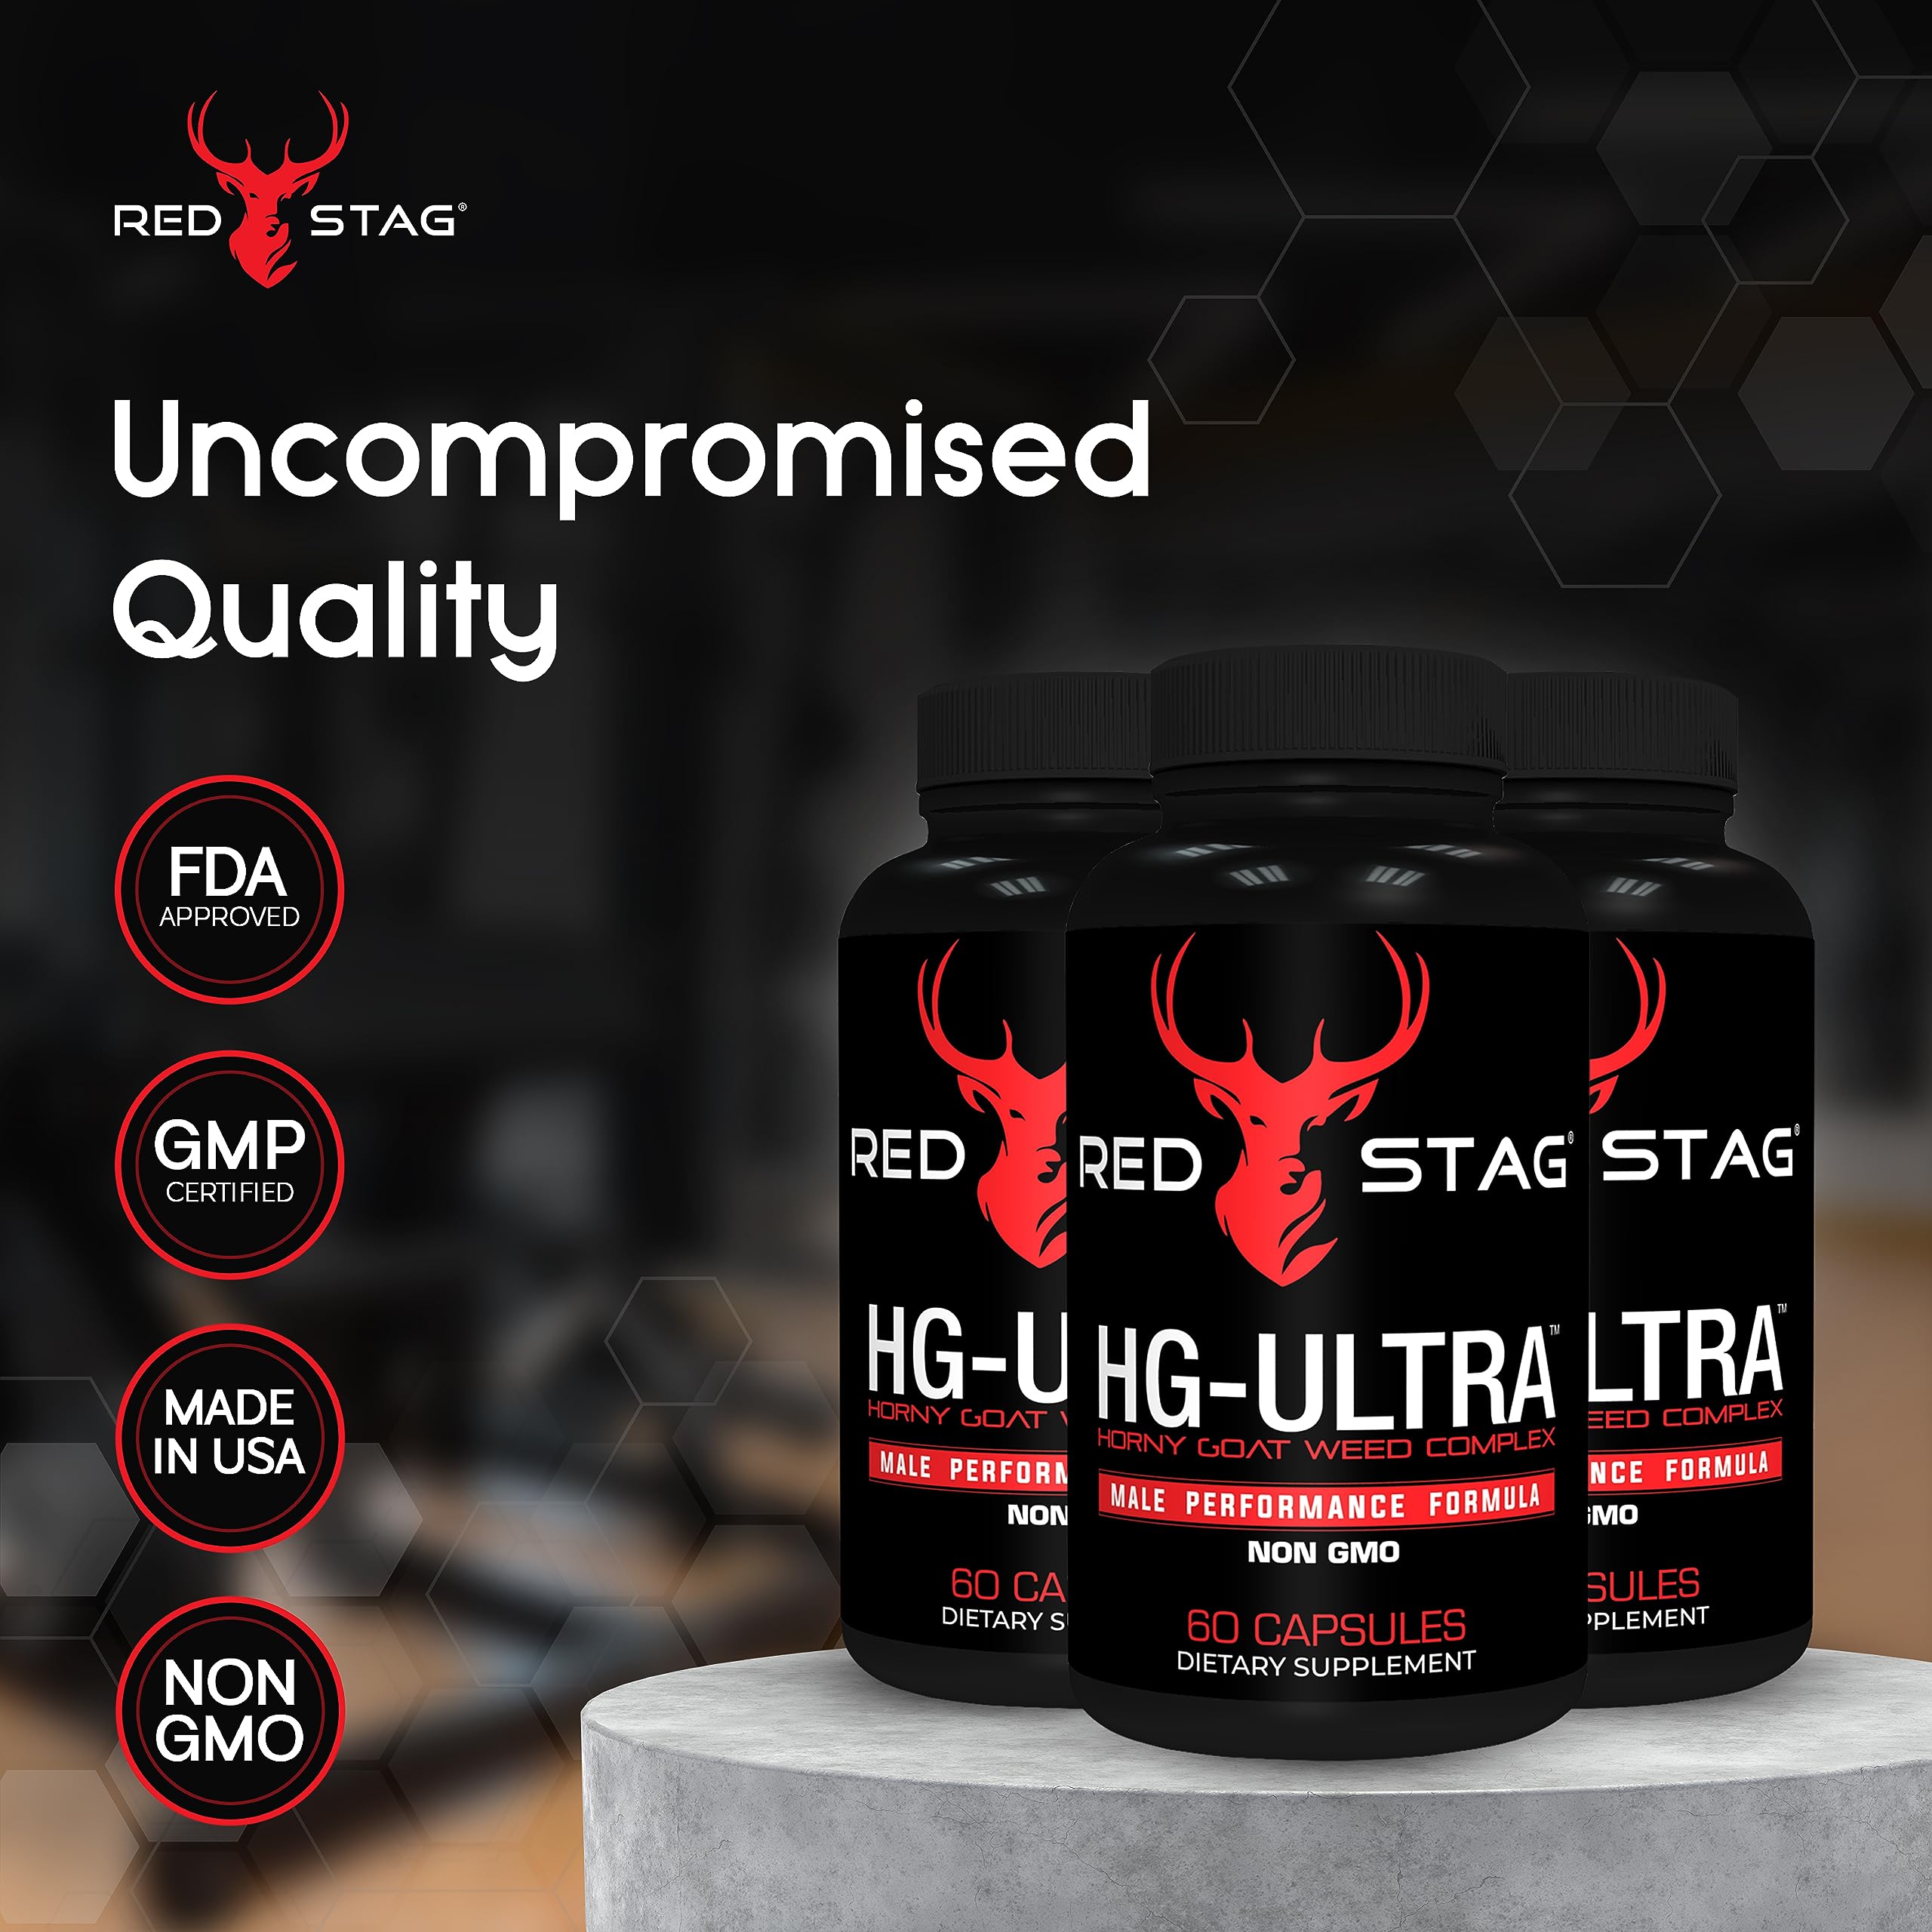 Supplement for Men - Red Stag HG Ultra Horny Goat Weed Extract with Maca Root Powder, Tribulus Terrestris, Saw Palmetto & Tongkat Ali Powder for Low T & Male Enhancement - 60 Capsules